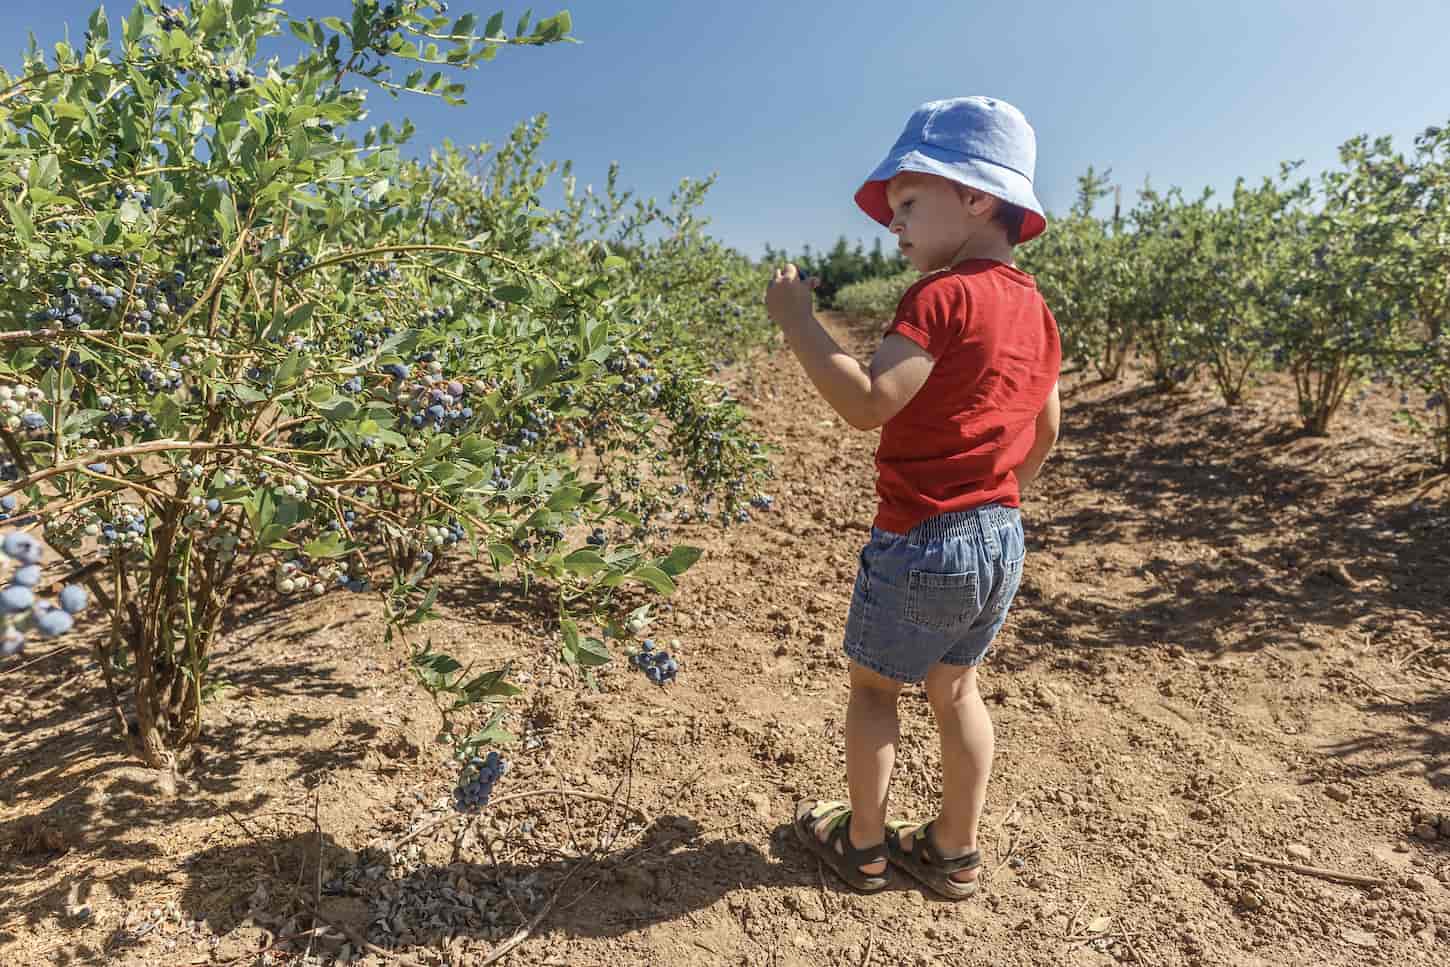 An image of a little boy harvesting blueberry crops on a local blueberry farm. Summer weekend activities for kids.